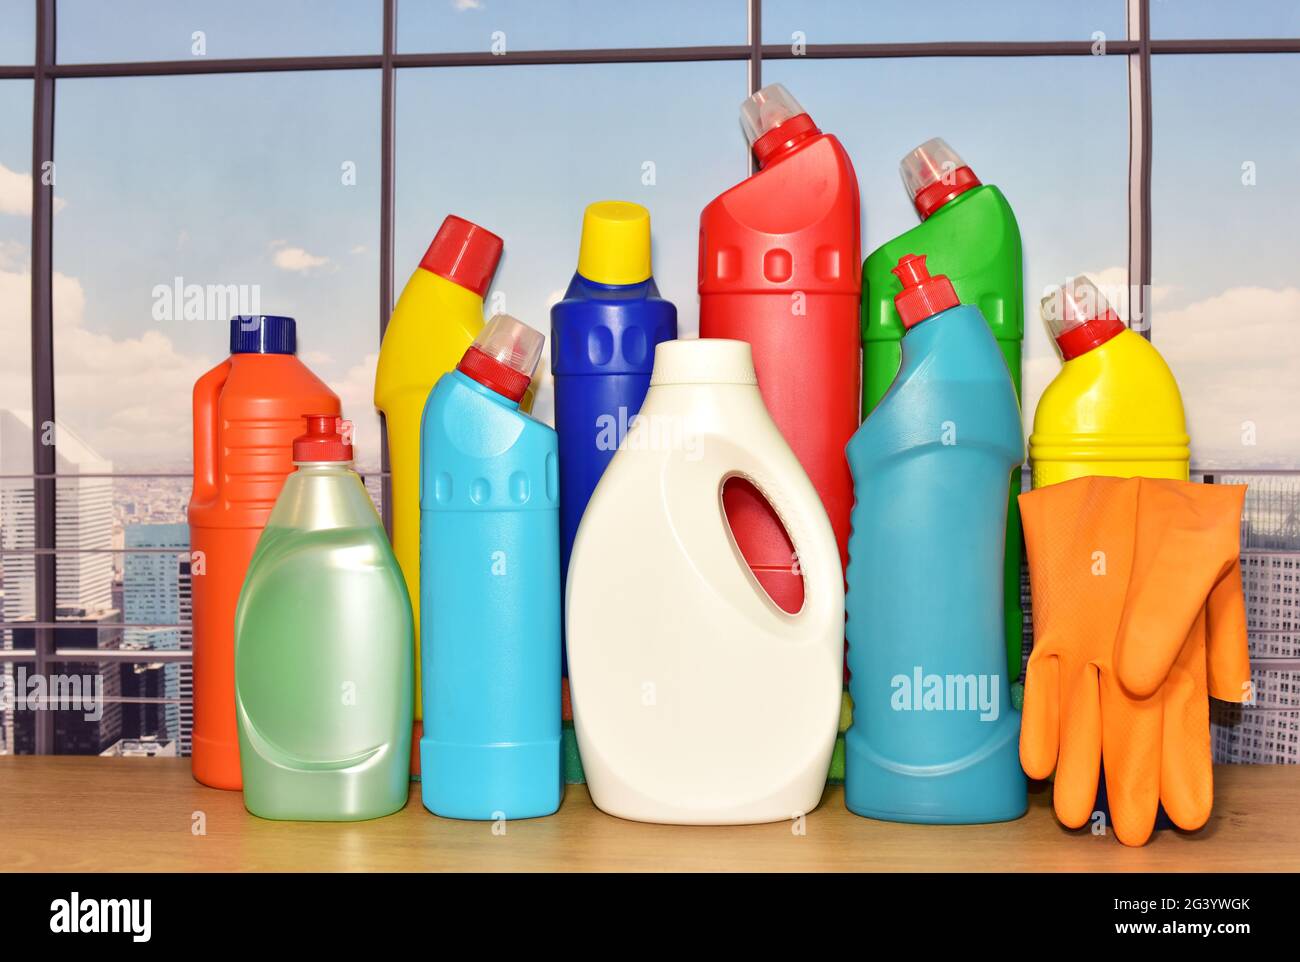 https://c8.alamy.com/comp/2G3YWGK/detergents-liquid-on-the-window-background-detergent-laundry-bottle-for-washing-and-dishwasher-household-for-cleaning-in-laundry-room-housekeeping-2G3YWGK.jpg